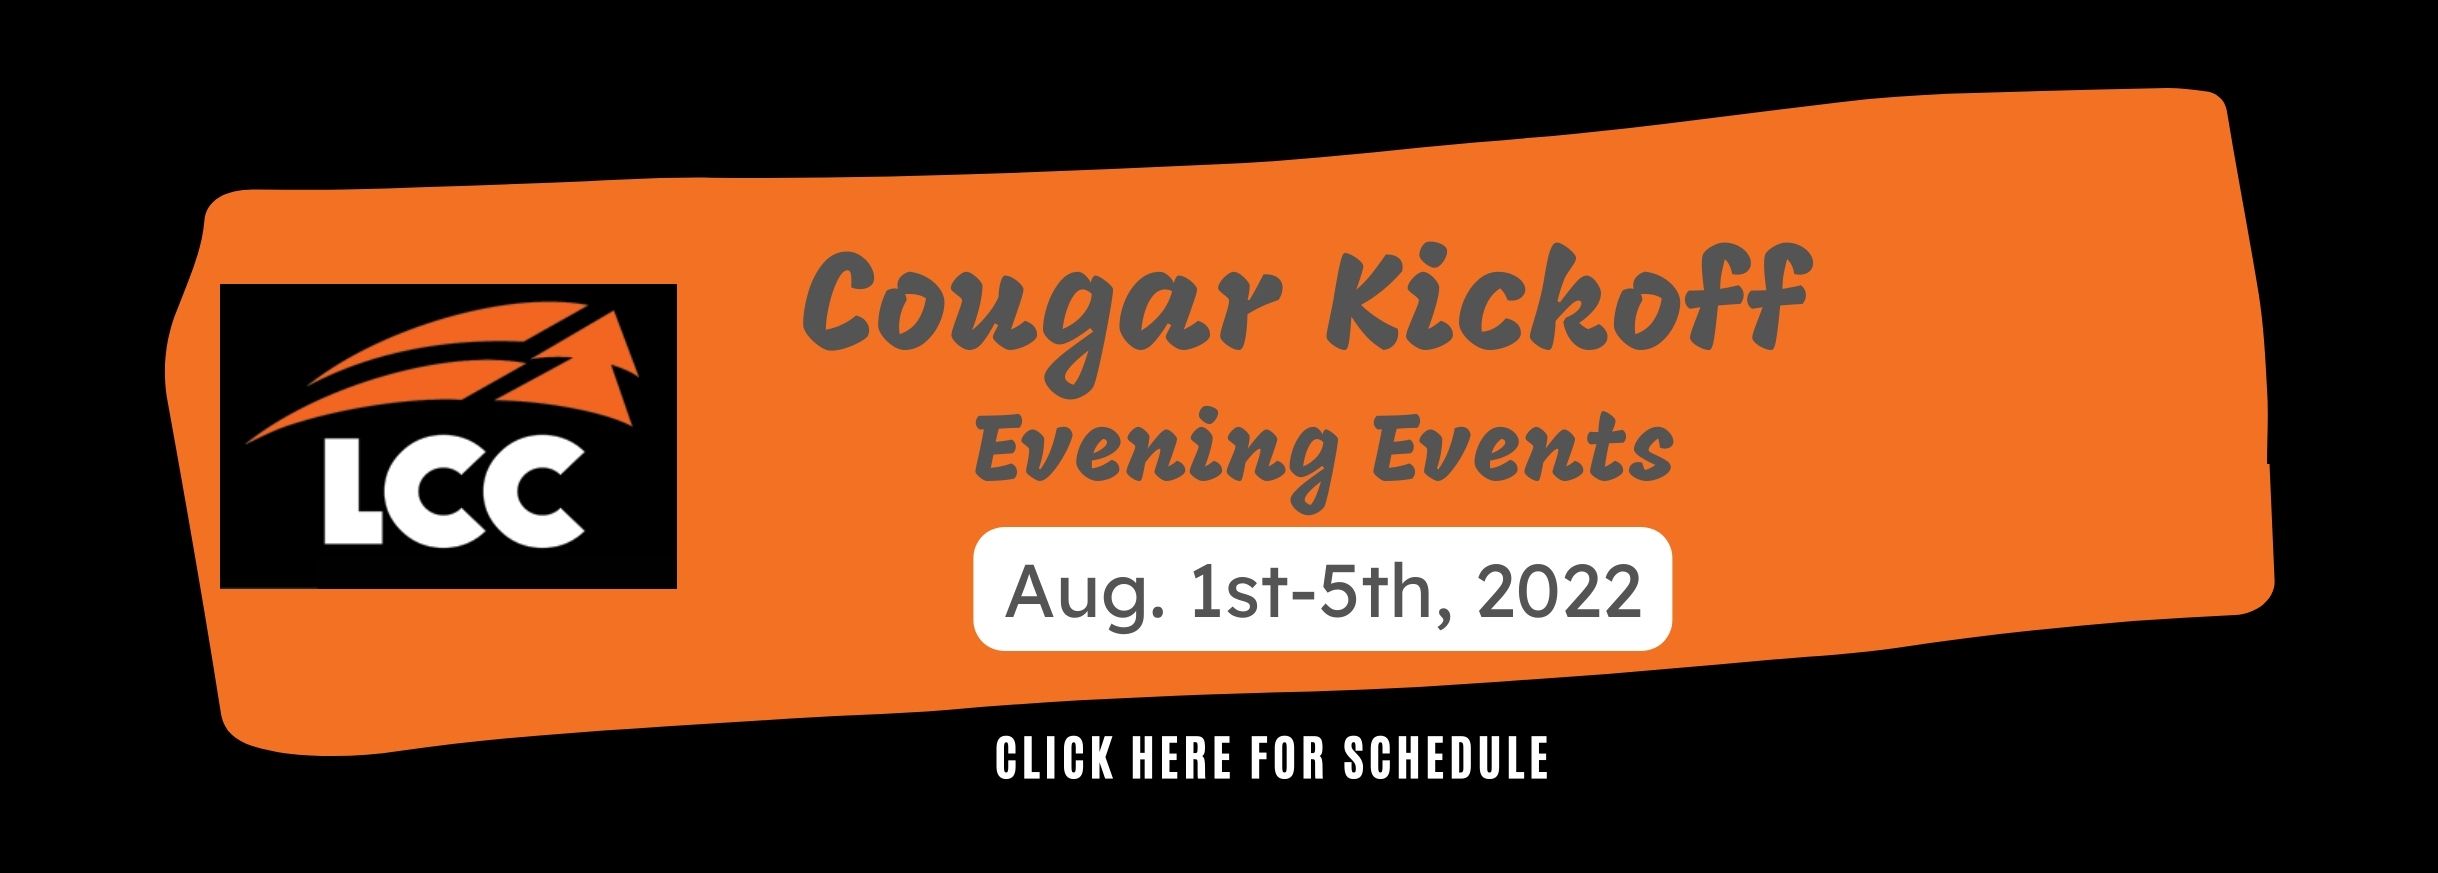 Cougar Kickoff Evening Events Aug. 1-5